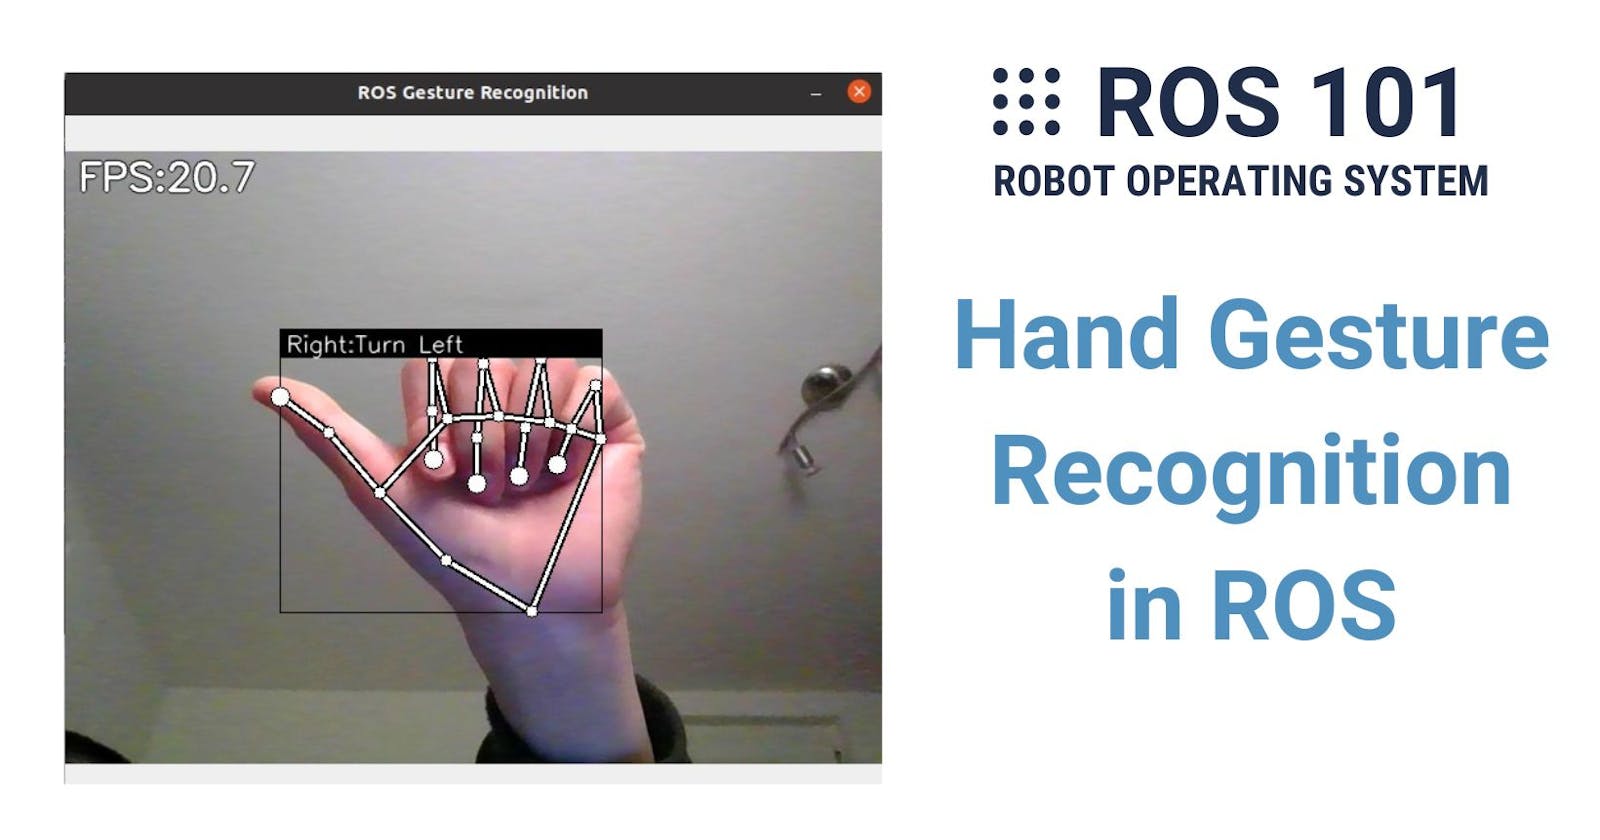 9. Hand Gesture Recognition in ROS